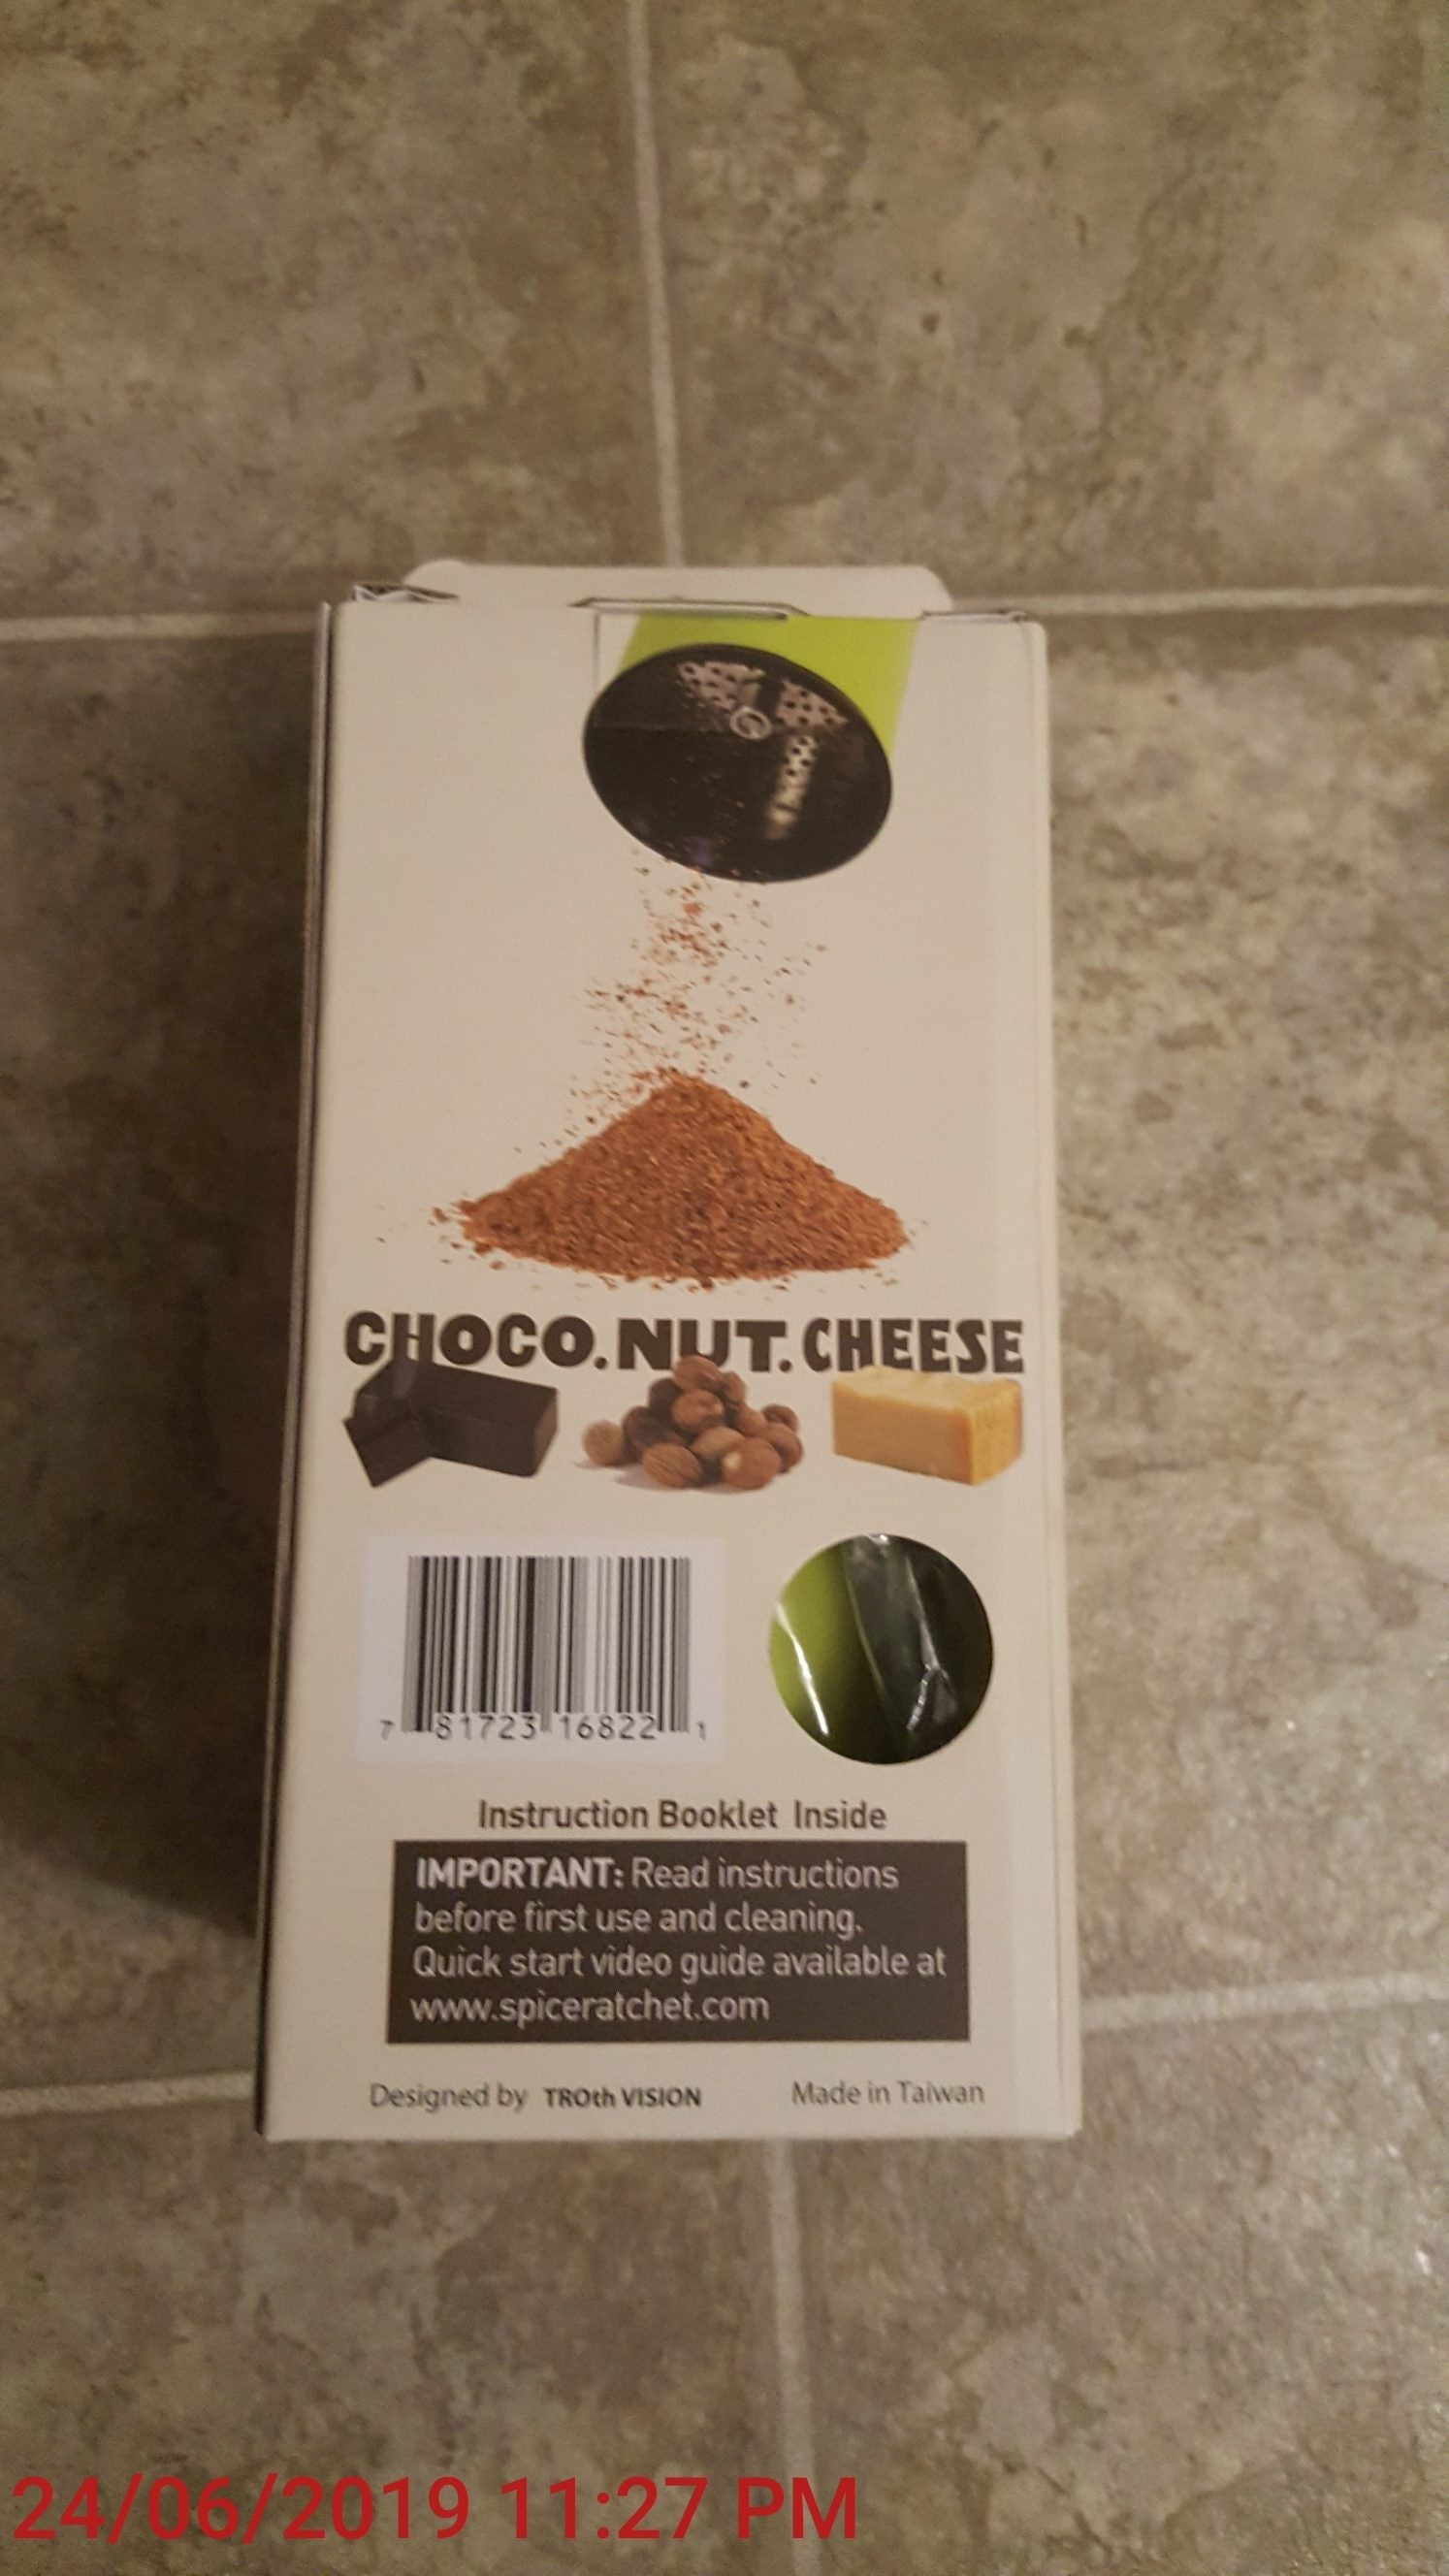 choco.nut.cheese grater, cheese grater, blossom cheese grater, chocolate  grater